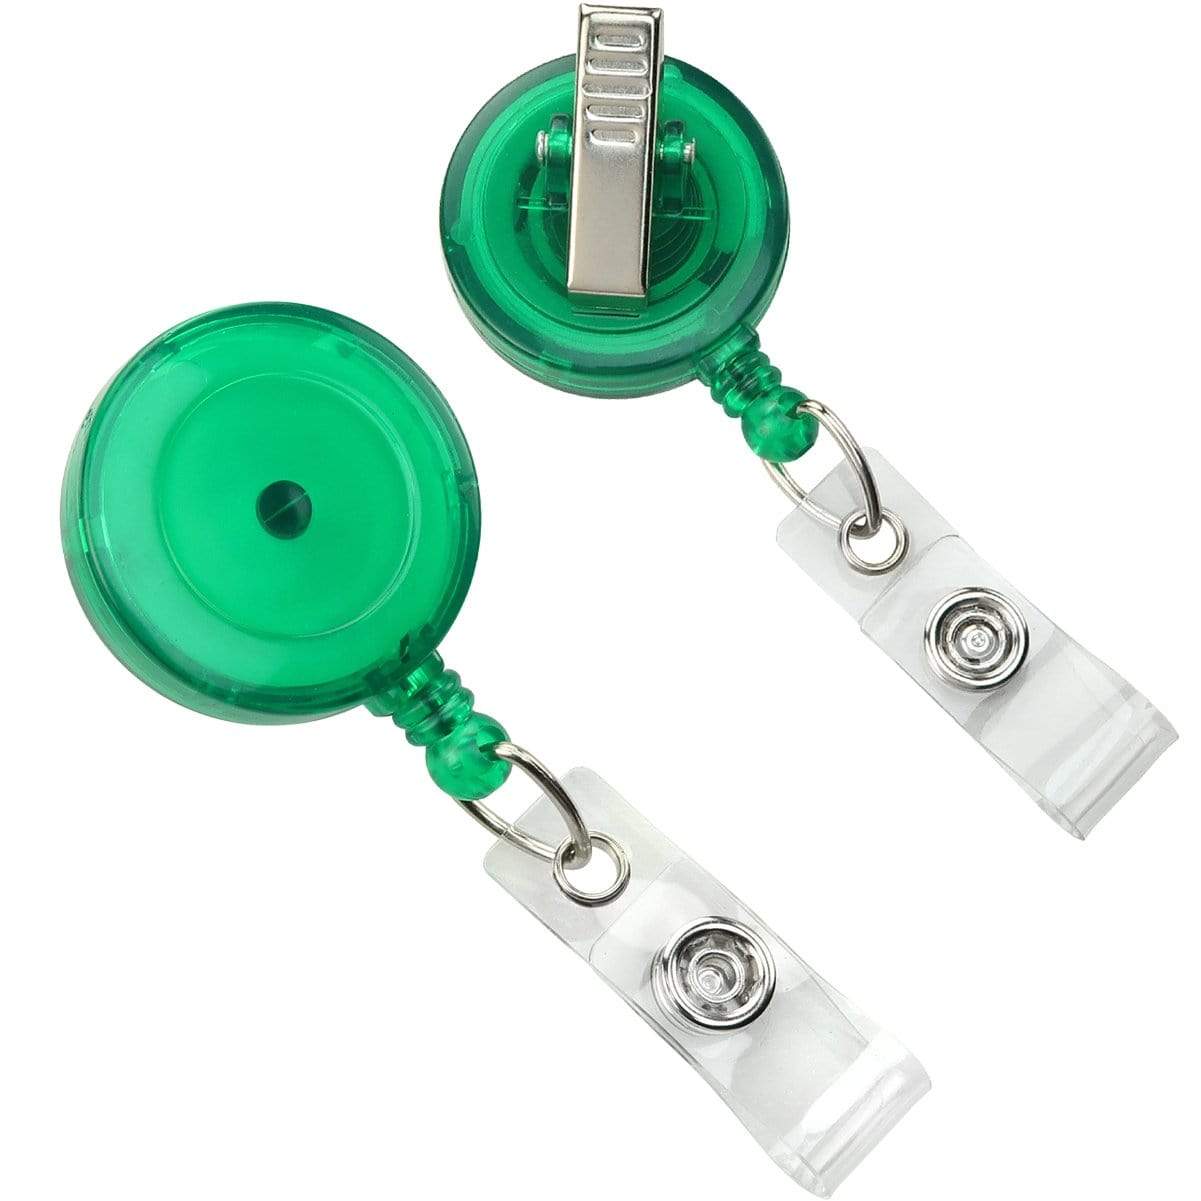 Translucent Badge Reel With Swivel Clip And Vinyl Strap Clip (P/N